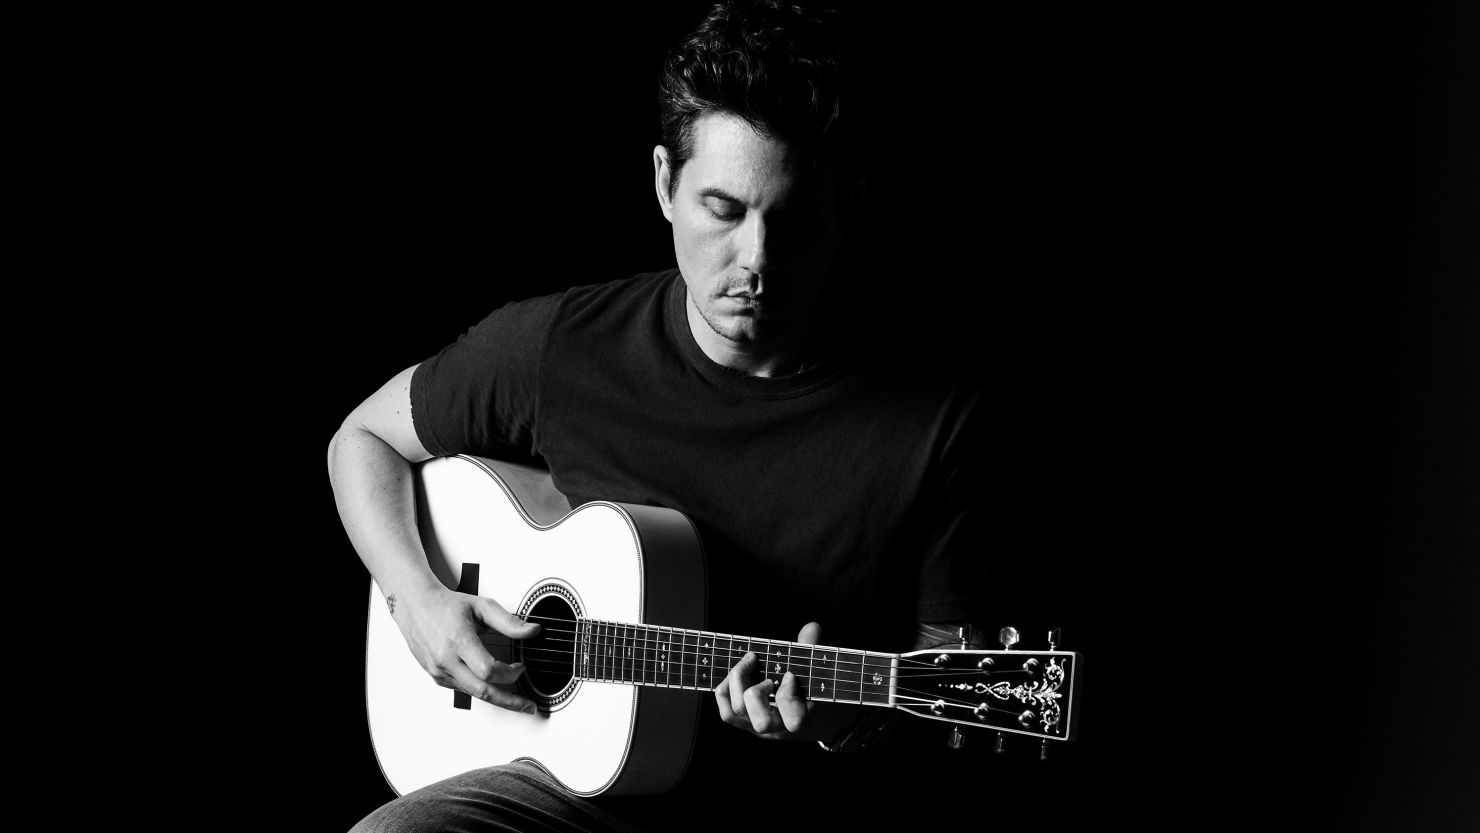 John Mayer will embark on his first-ever solo acoustic tour this spring.